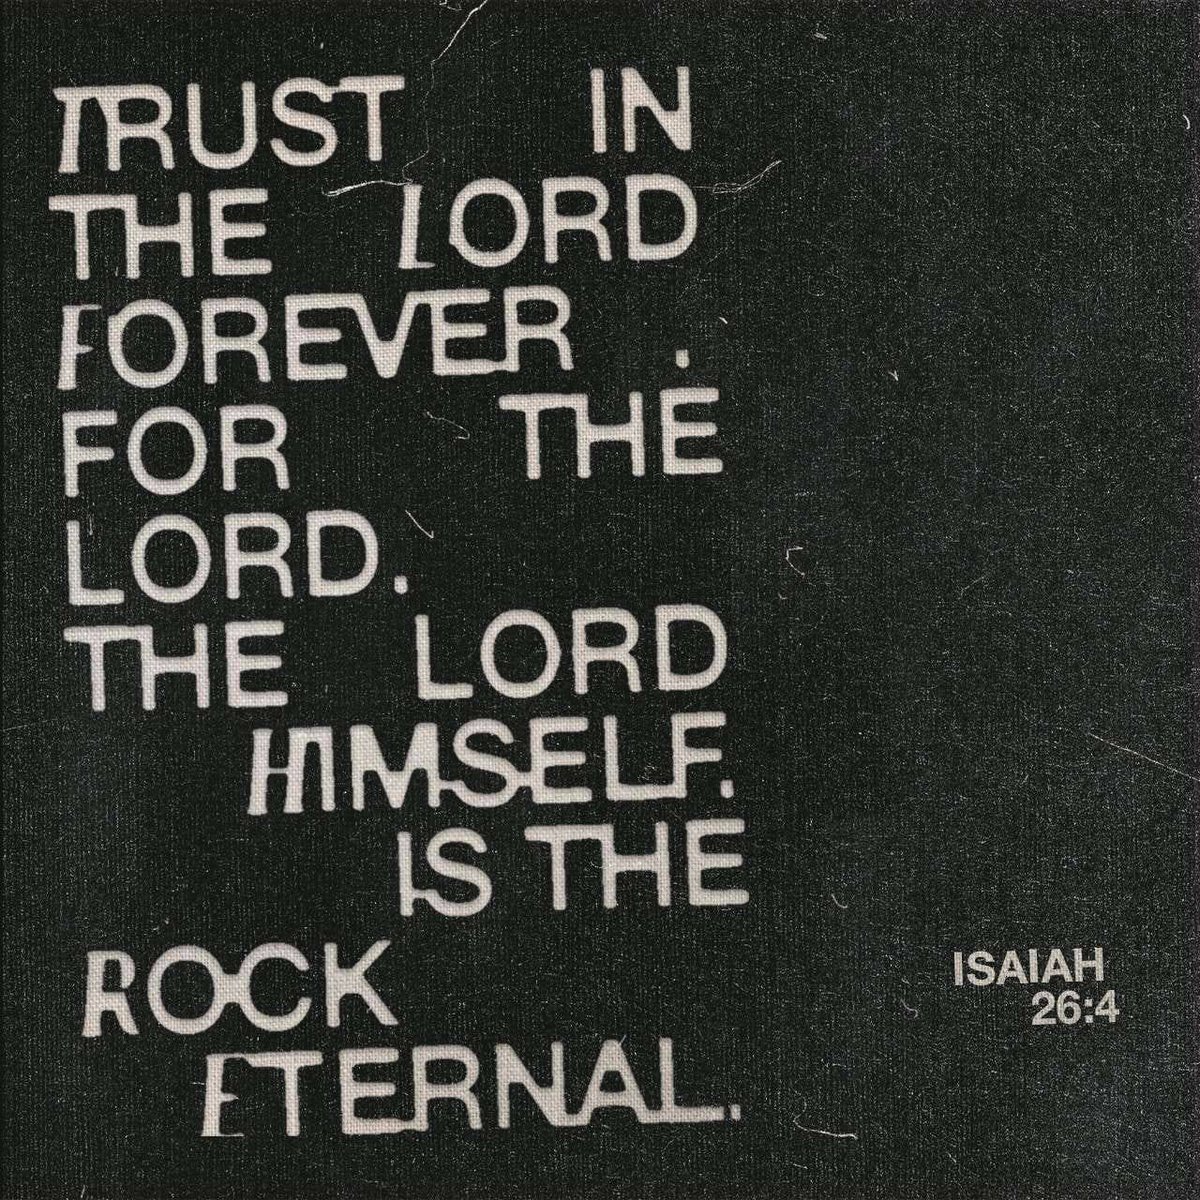 Isaiah 26:4 NKJV [4] Trust in the Lord forever, For in YAH, the Lord, is everlasting strength. bible.com/bible/114/isa.…